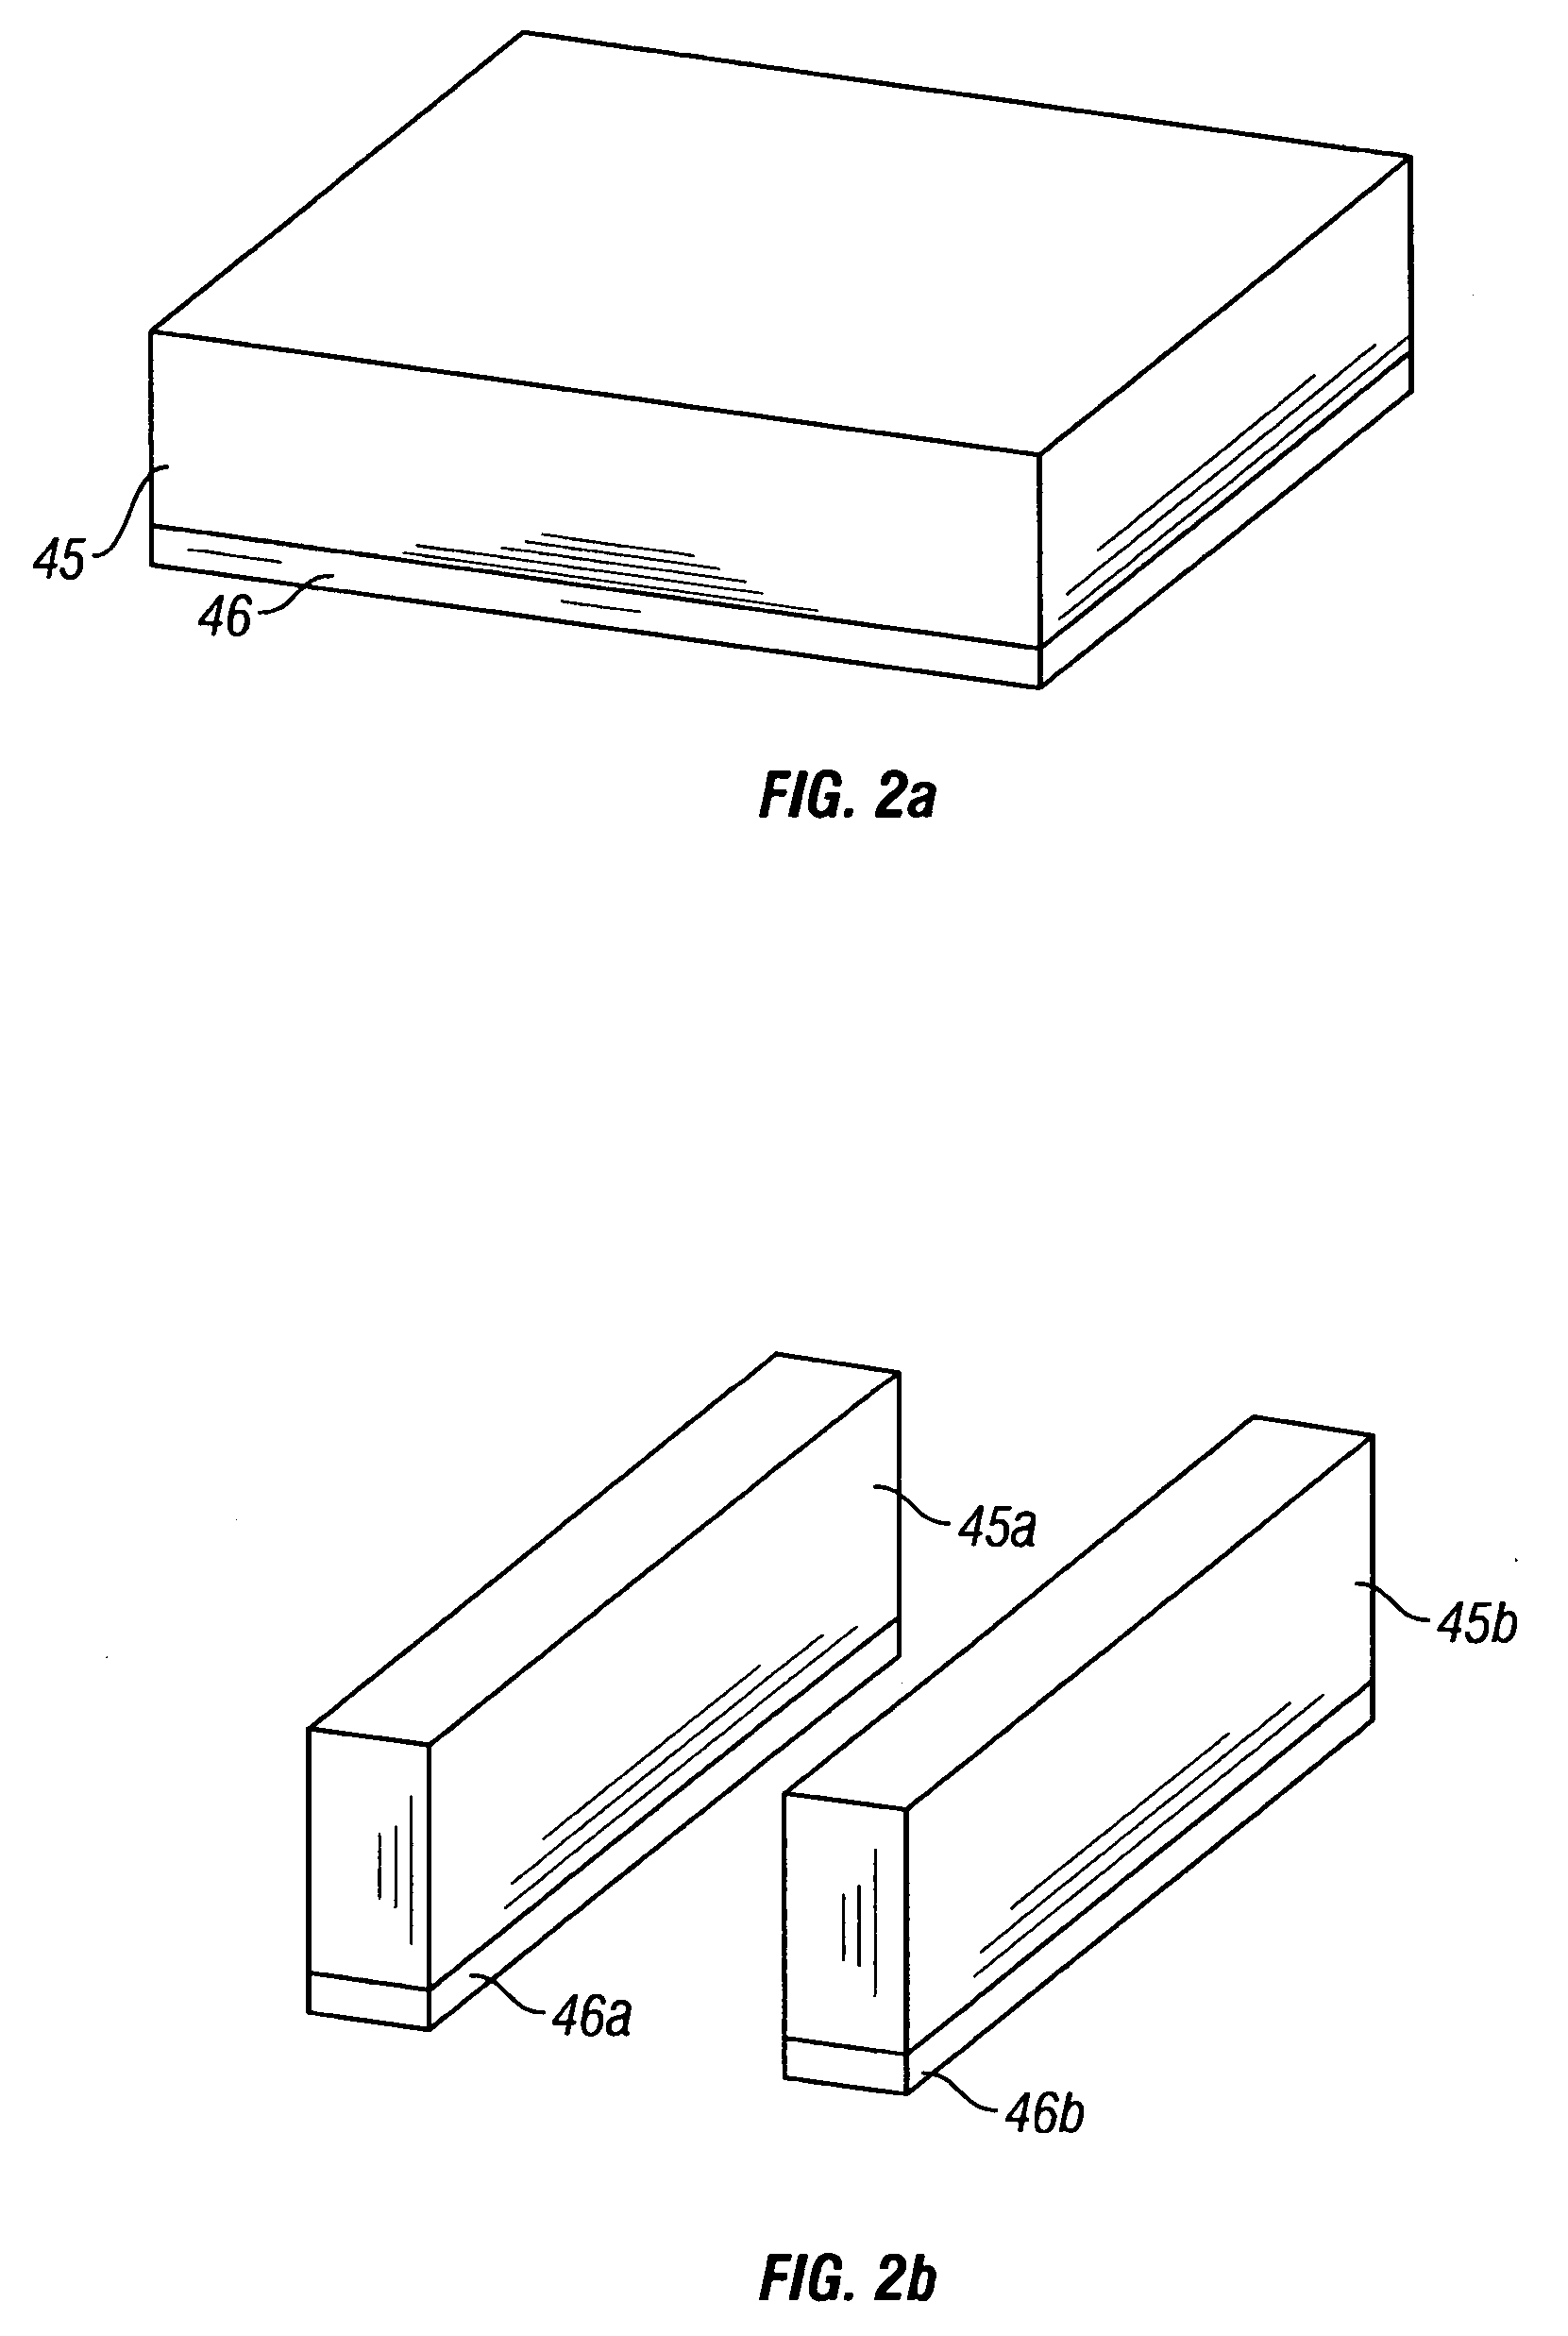 Contacts for an improved high-density nonvolatile memory